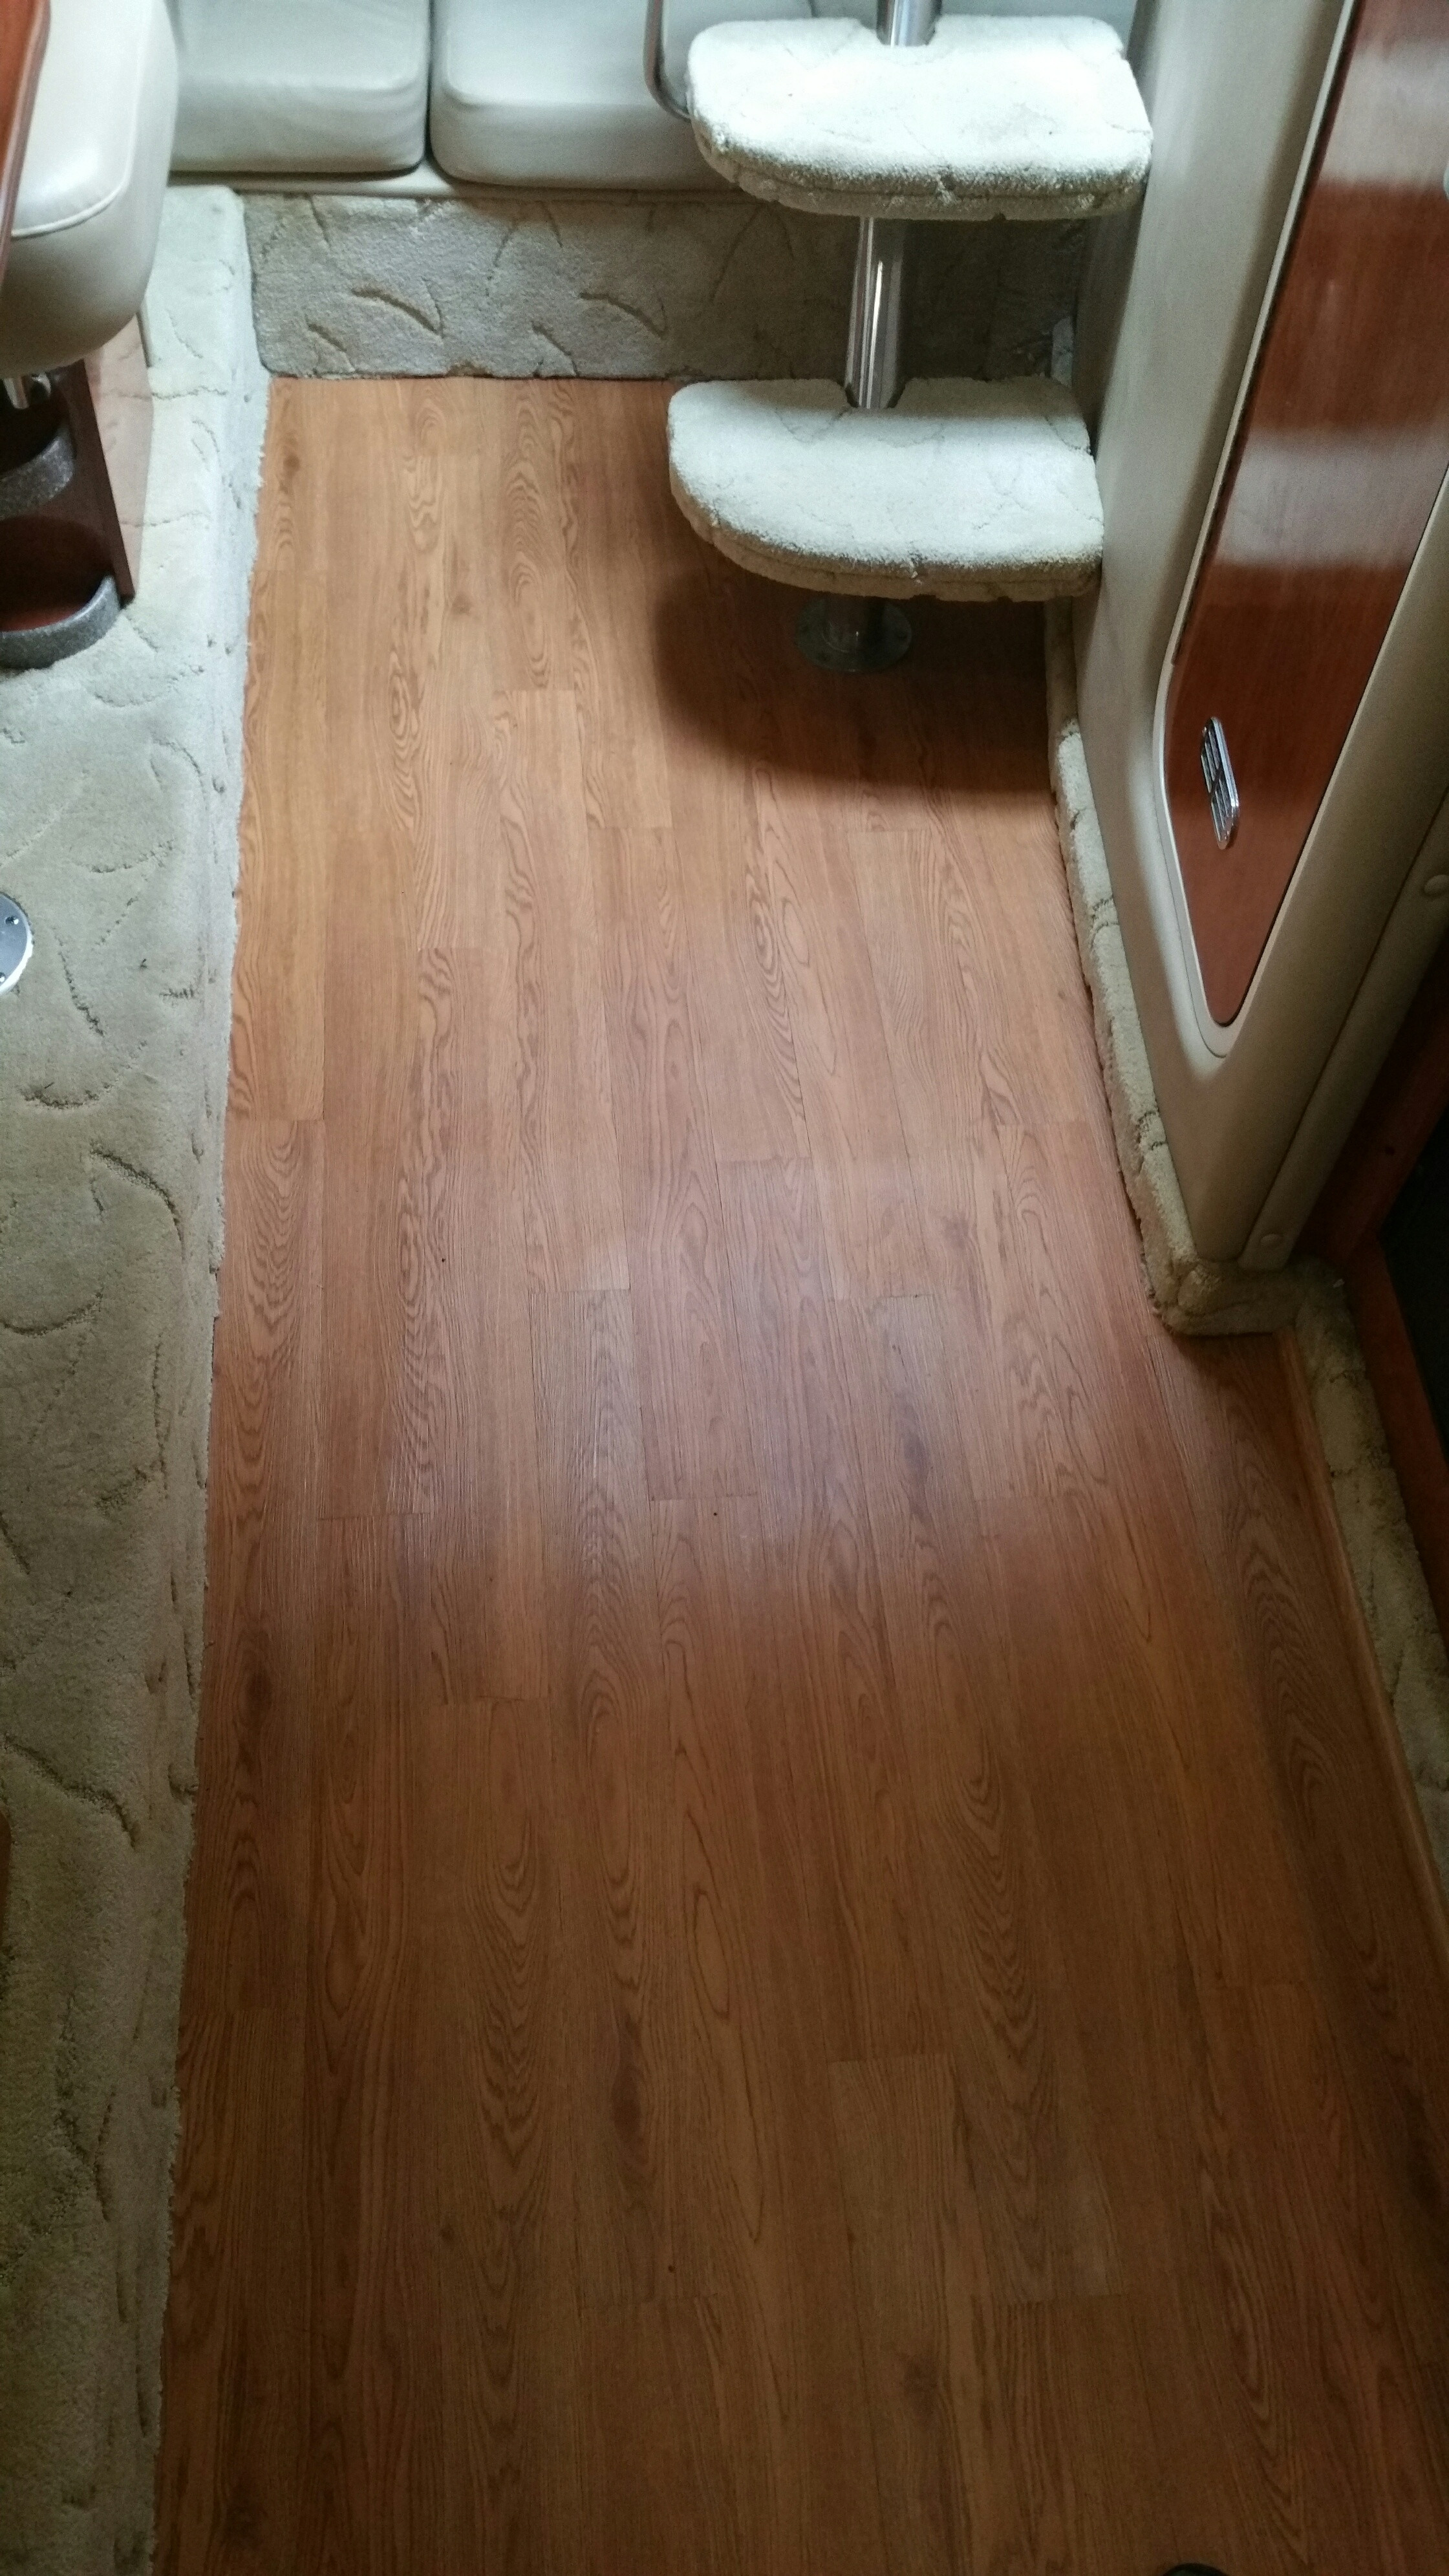 29 Wonderful Hardwood Floor Stairs Slippery 2022 free download hardwood floor stairs slippery of replacing carpet in my 342 rinker boats inside actually the stair frame is angled a bit and that gave it a crooked look but once the steps were put back on 